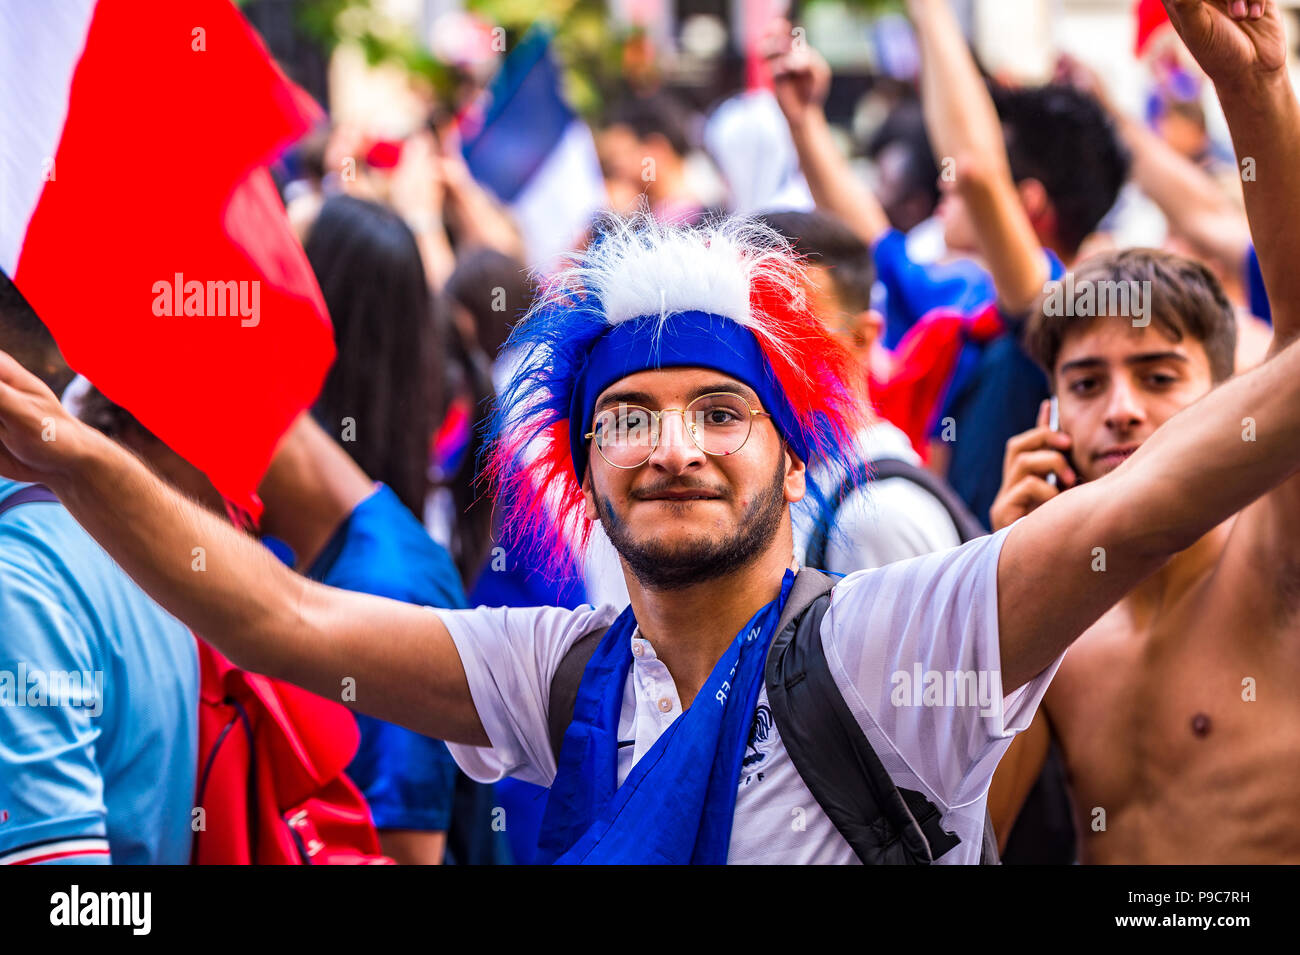 Paris, France. 15th July, 2018. Large crowds celebrate in the streets of Paris after France wins the 2018 FIFA World Cup Russia. Paris, France. Stock Photo